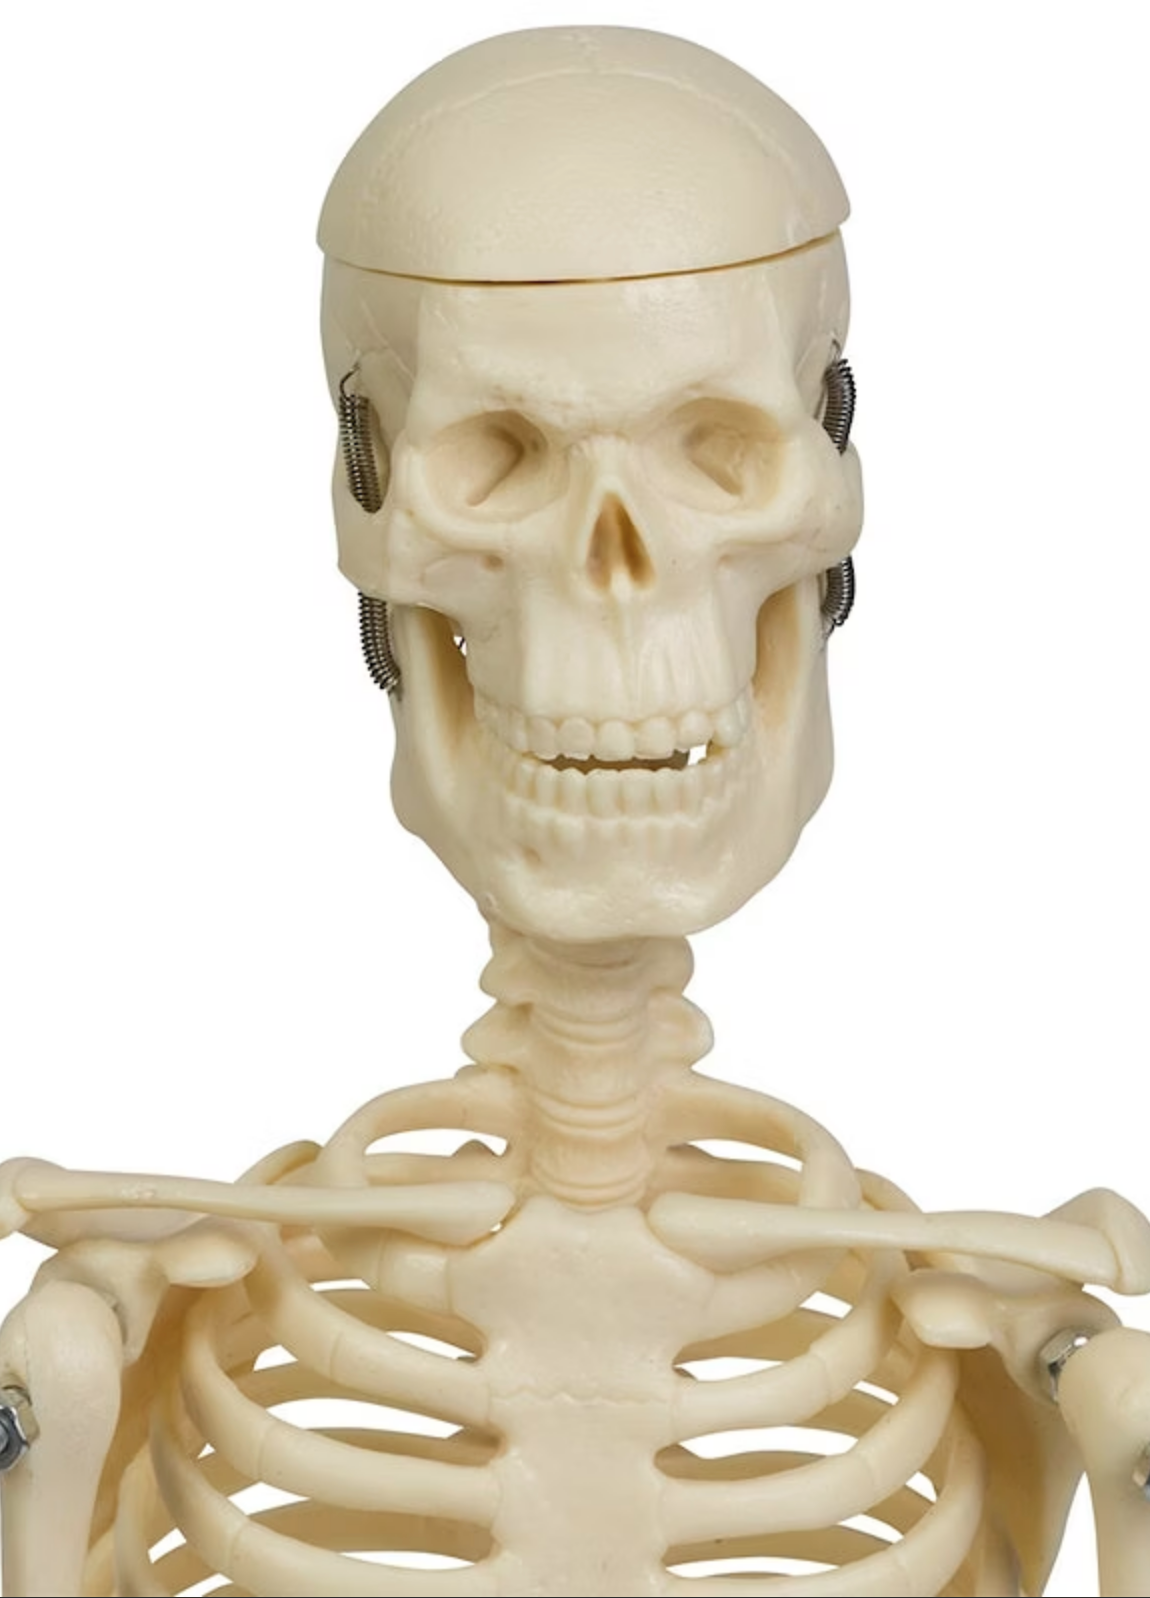 Reduced and simplified skeleton model of 44 cm